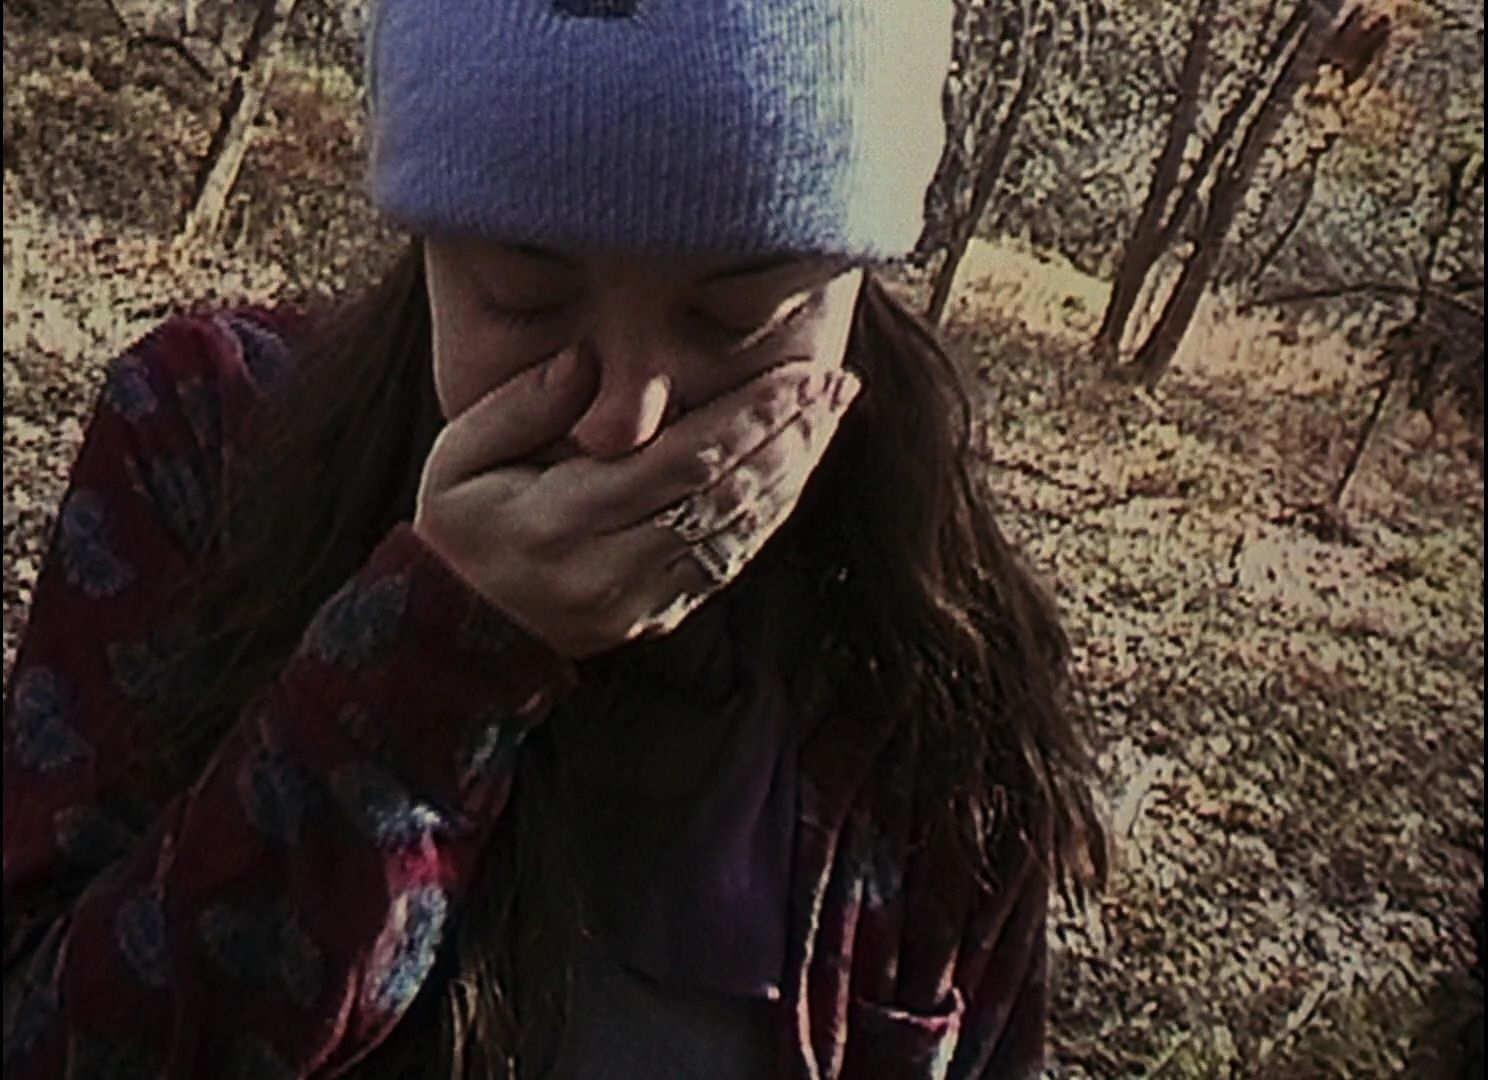 Heather Donahue covering her mouth with her hand.